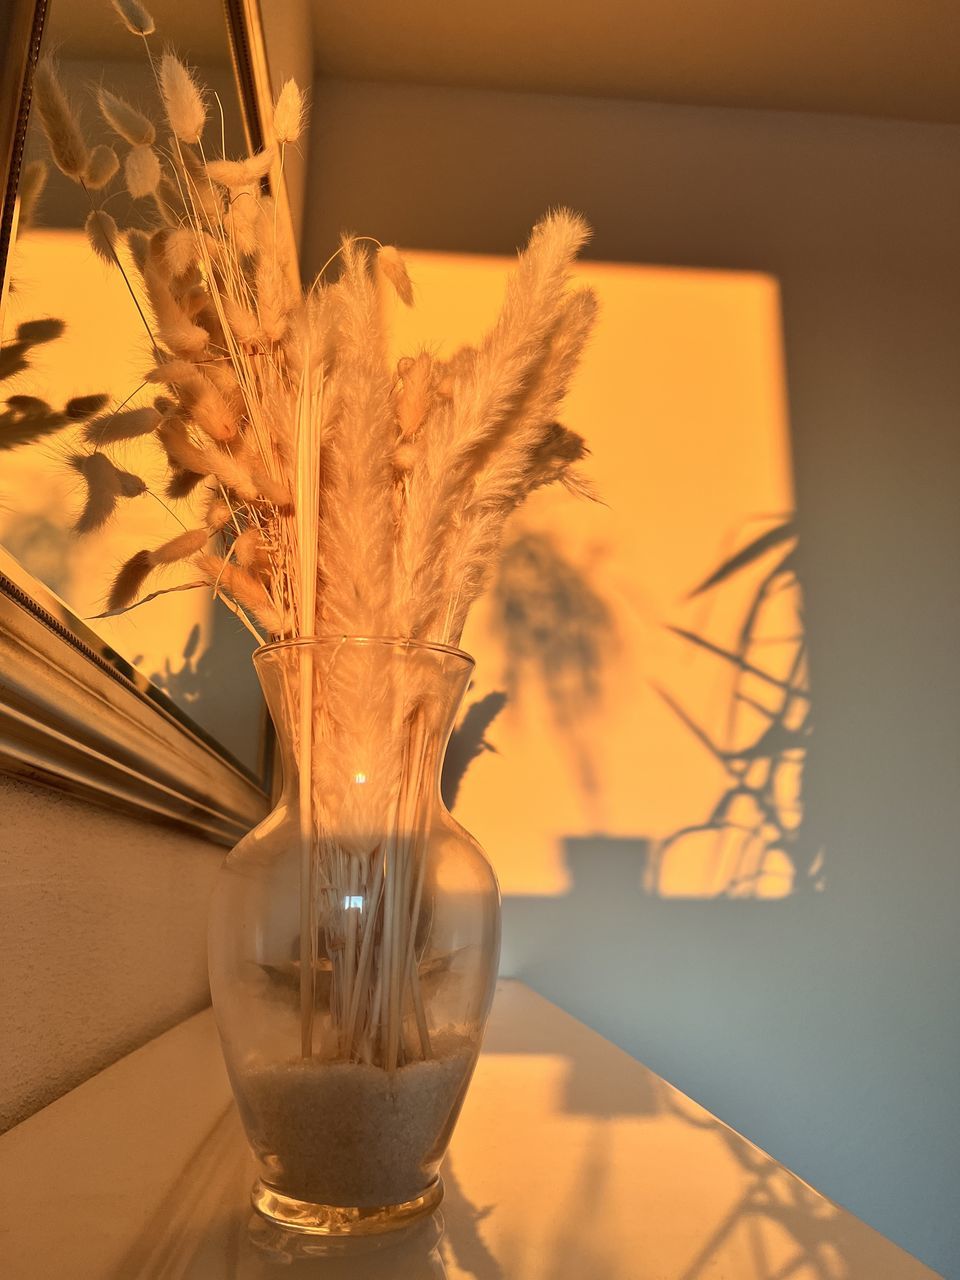 Decoration Evening Sun Lightning Indoors  Vase Glass No People Yellow Nature Plant Household Equipment Table Food And Drink Flower Centrepiece Drinking Glass Close-up Art Still Life First Eyeem Photo